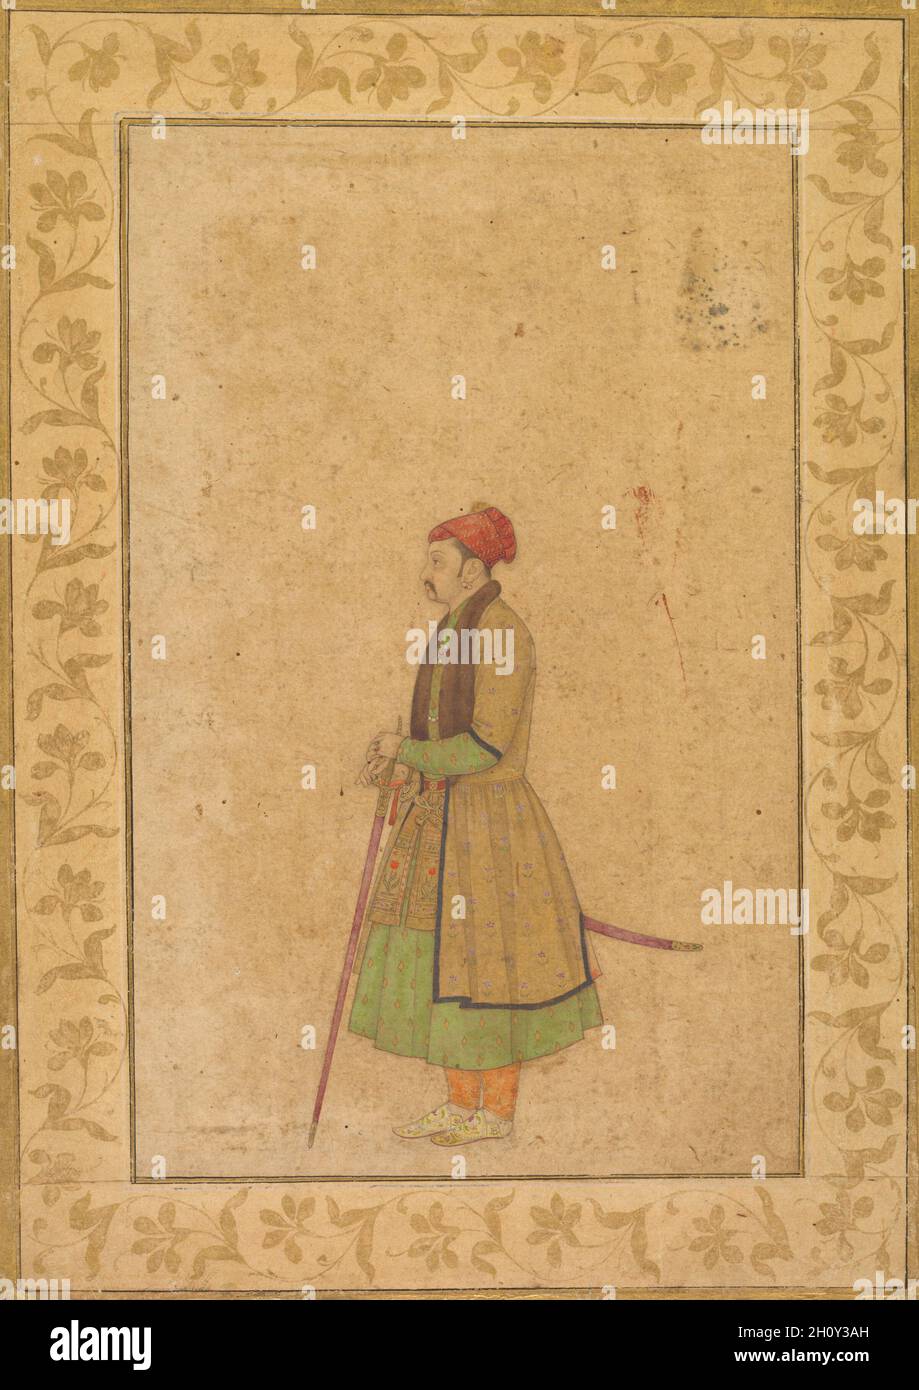 Portrait of Raja Ram Singh of Amber (r. 1667-1688) with a Deccan Sword (recto), c. 1680–85. India, Mughal, 17th century. Opaque watercolor on paper (recto); page: 30.4 x 18.5 cm (11 15/16 x 7 5/16 in.).  The sensitive, naturalistic rendering of weariness and forbearance in the face belies the trappings of favor bestowed on Ram Singh by the Mughal emperors Shah Jahan and Alamgir, whom he served as courtier and general between 1643 and 1688. He was a Hindu ruler from the kingdom of Amber in Rajasthan, under the control of the Mughal empire. Spending most of his life at the imperial court or lead Stock Photo